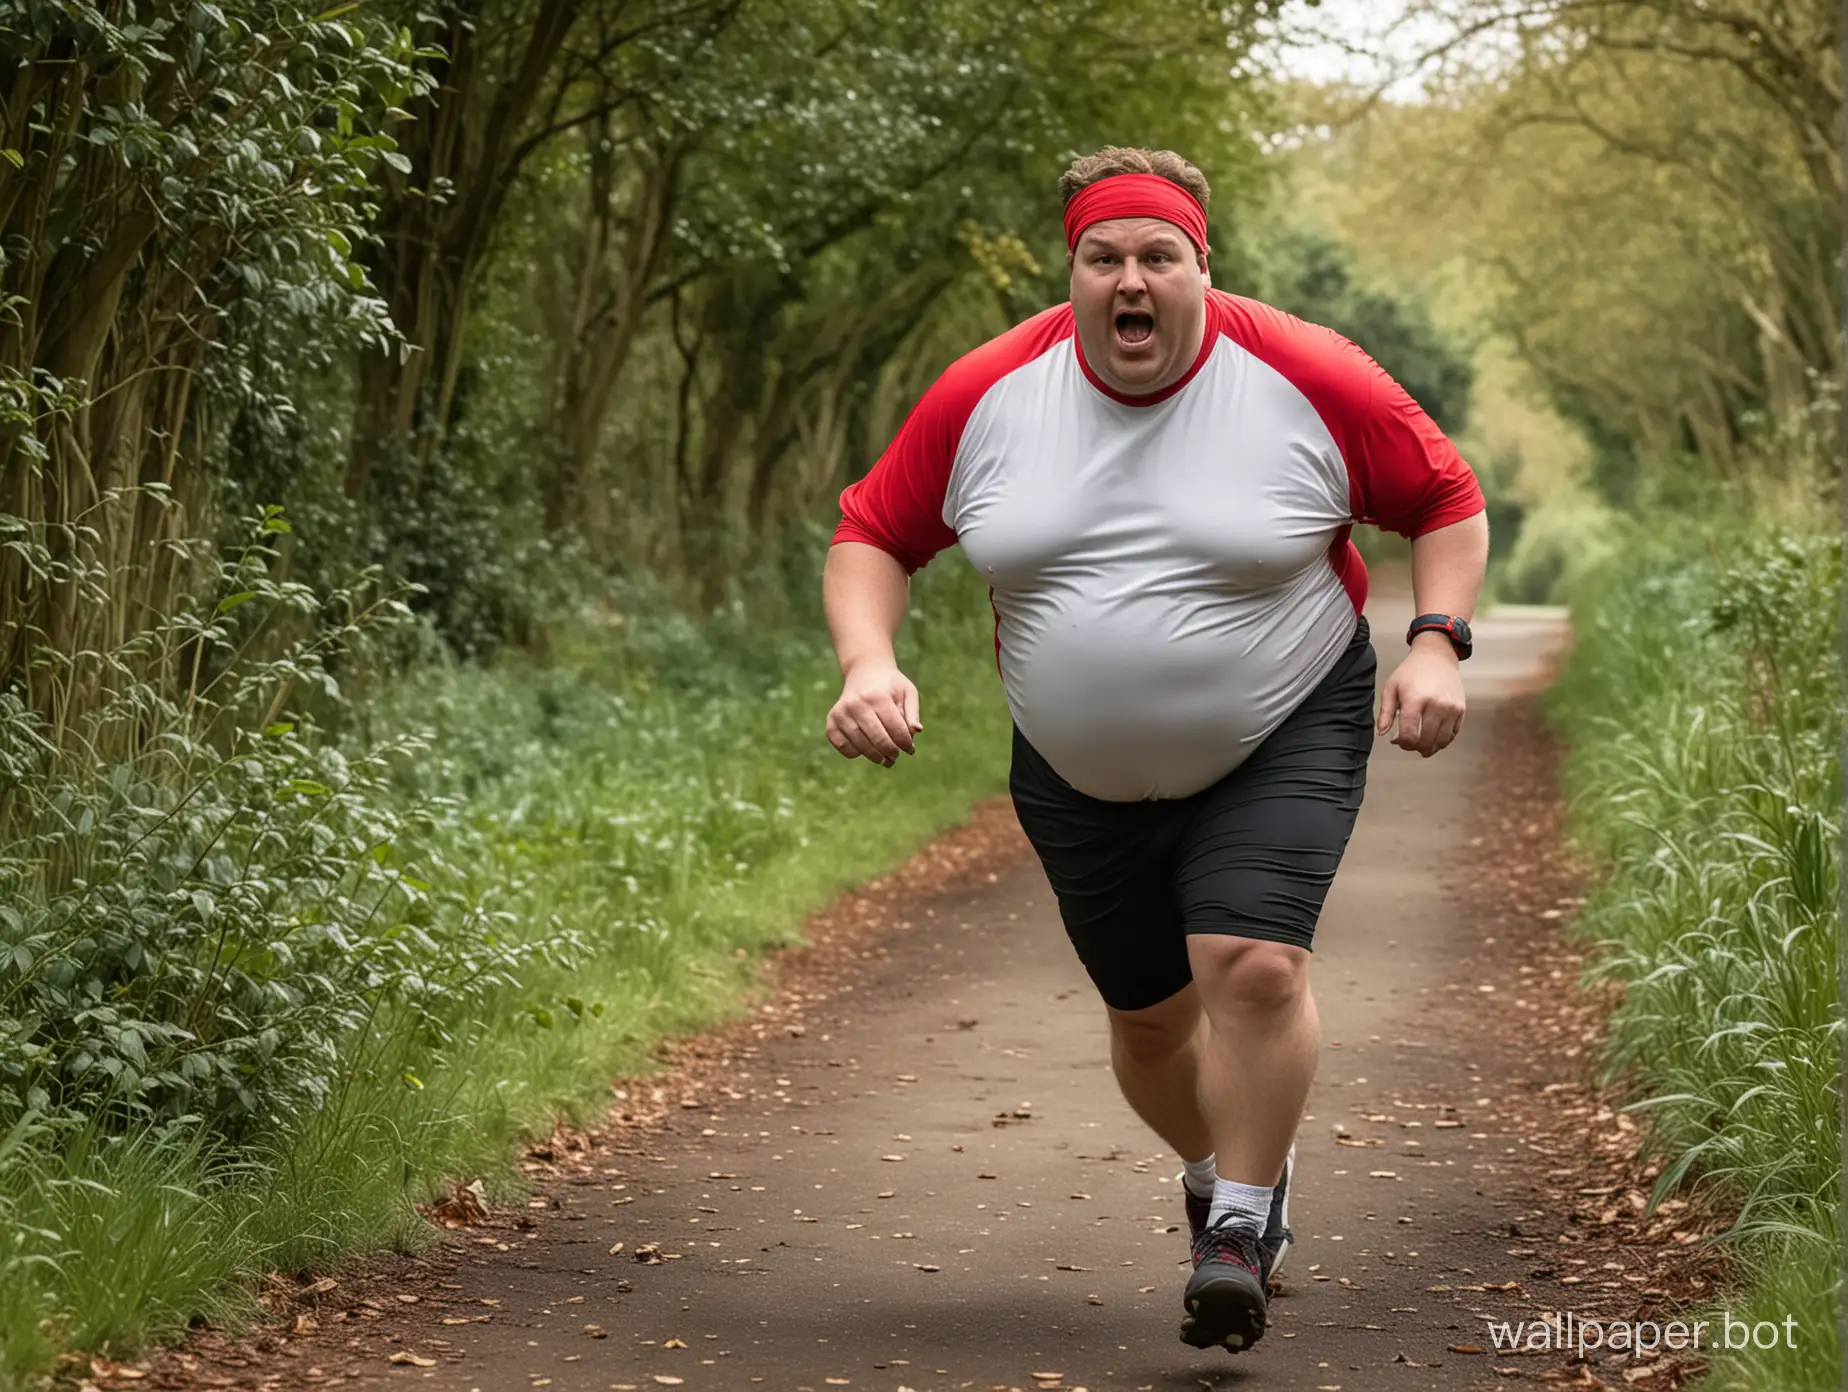 Obese jogger running down a leafy lane in the English countryside. Wearing unflattering spandex and a red headband, agony on his face, detailed features, sharp image.